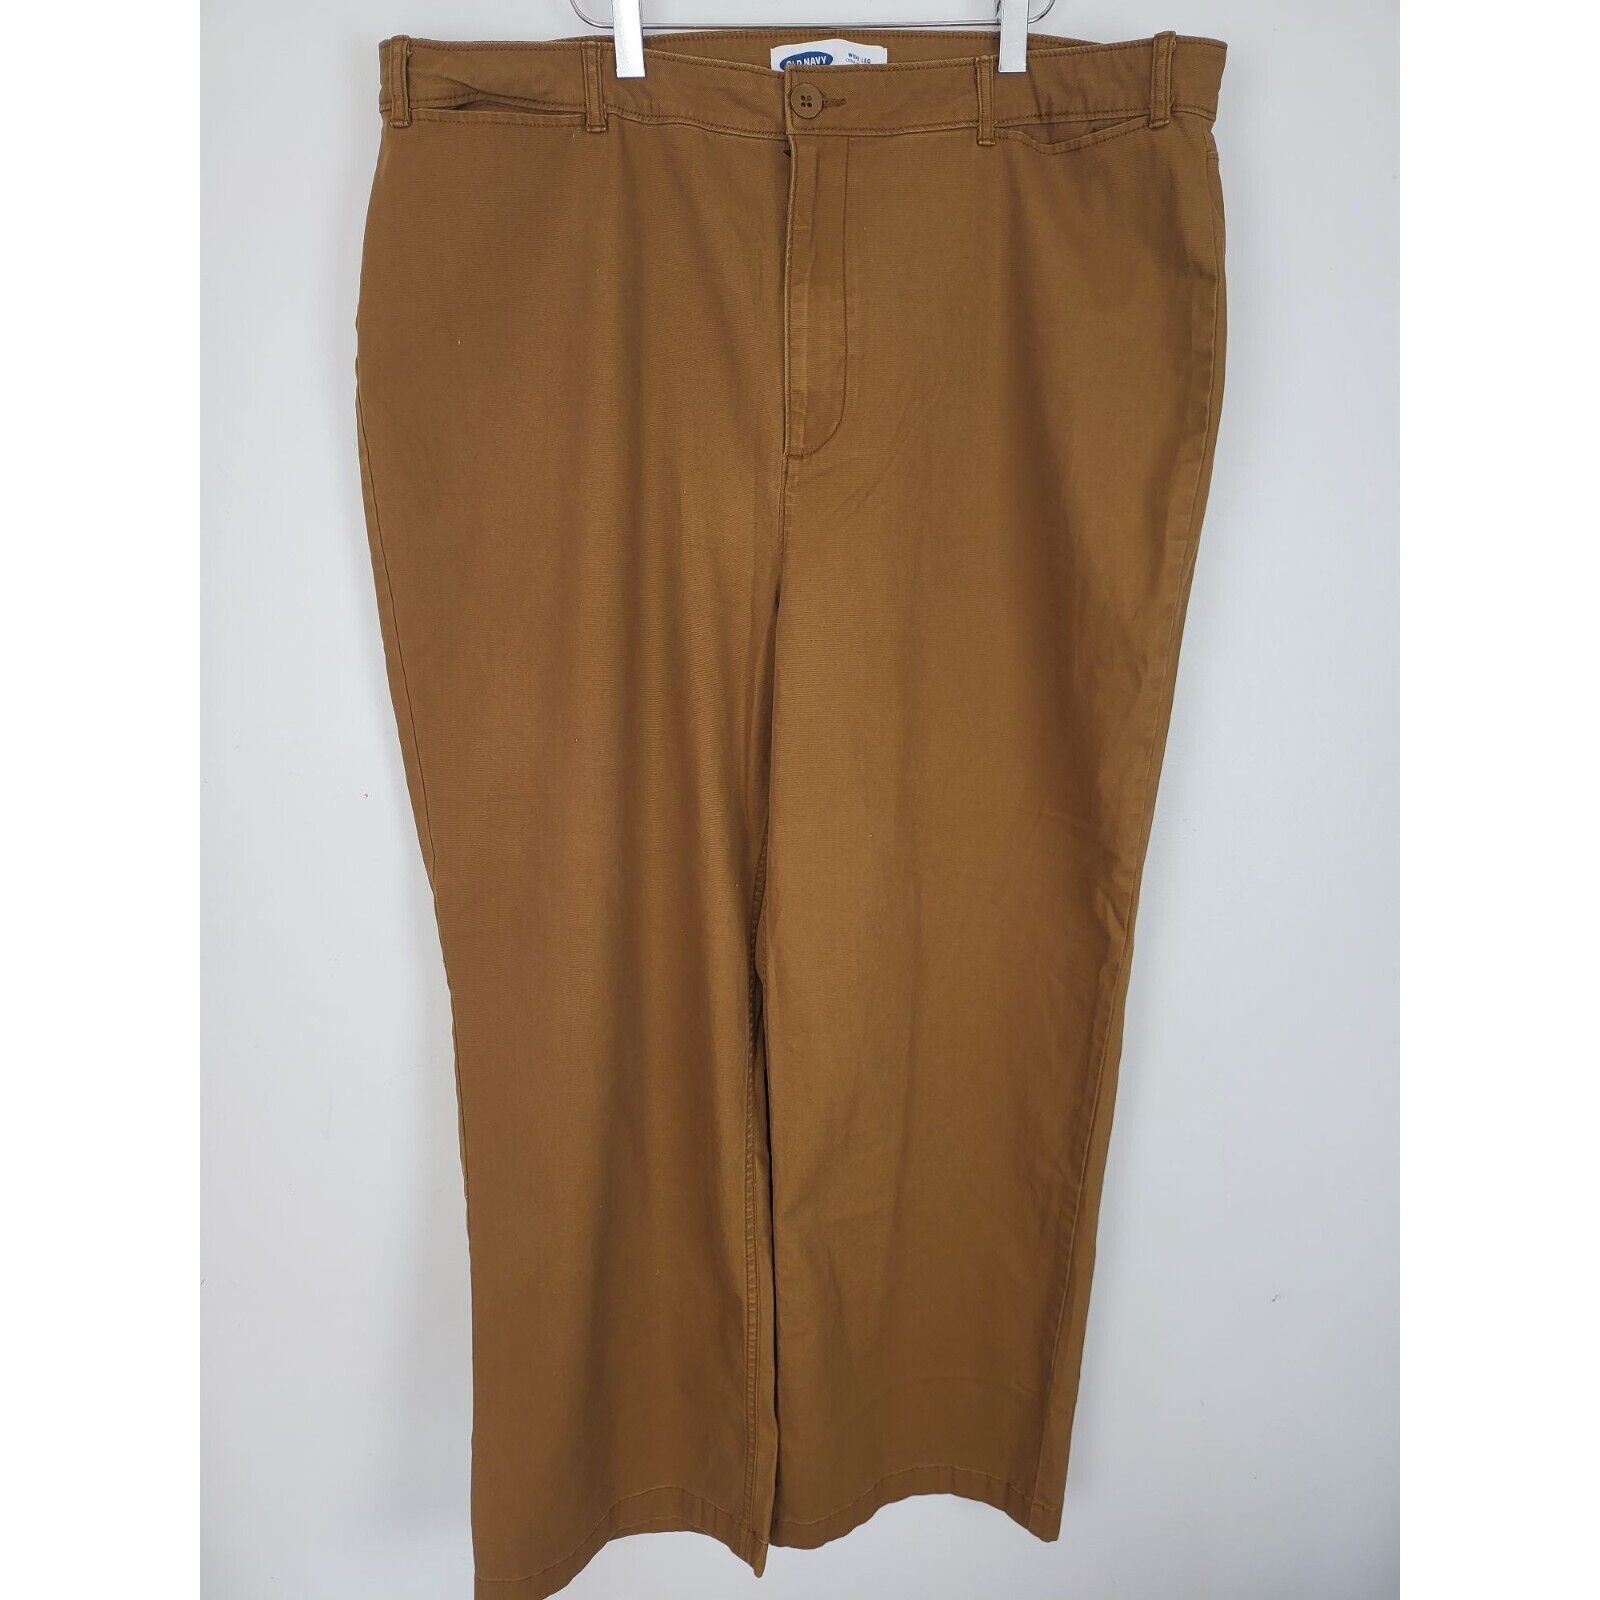 Primary image for Old Navy Pants 18 Tall Womens Plus Size Extra High Rise Wide Leg Brown Bottoms